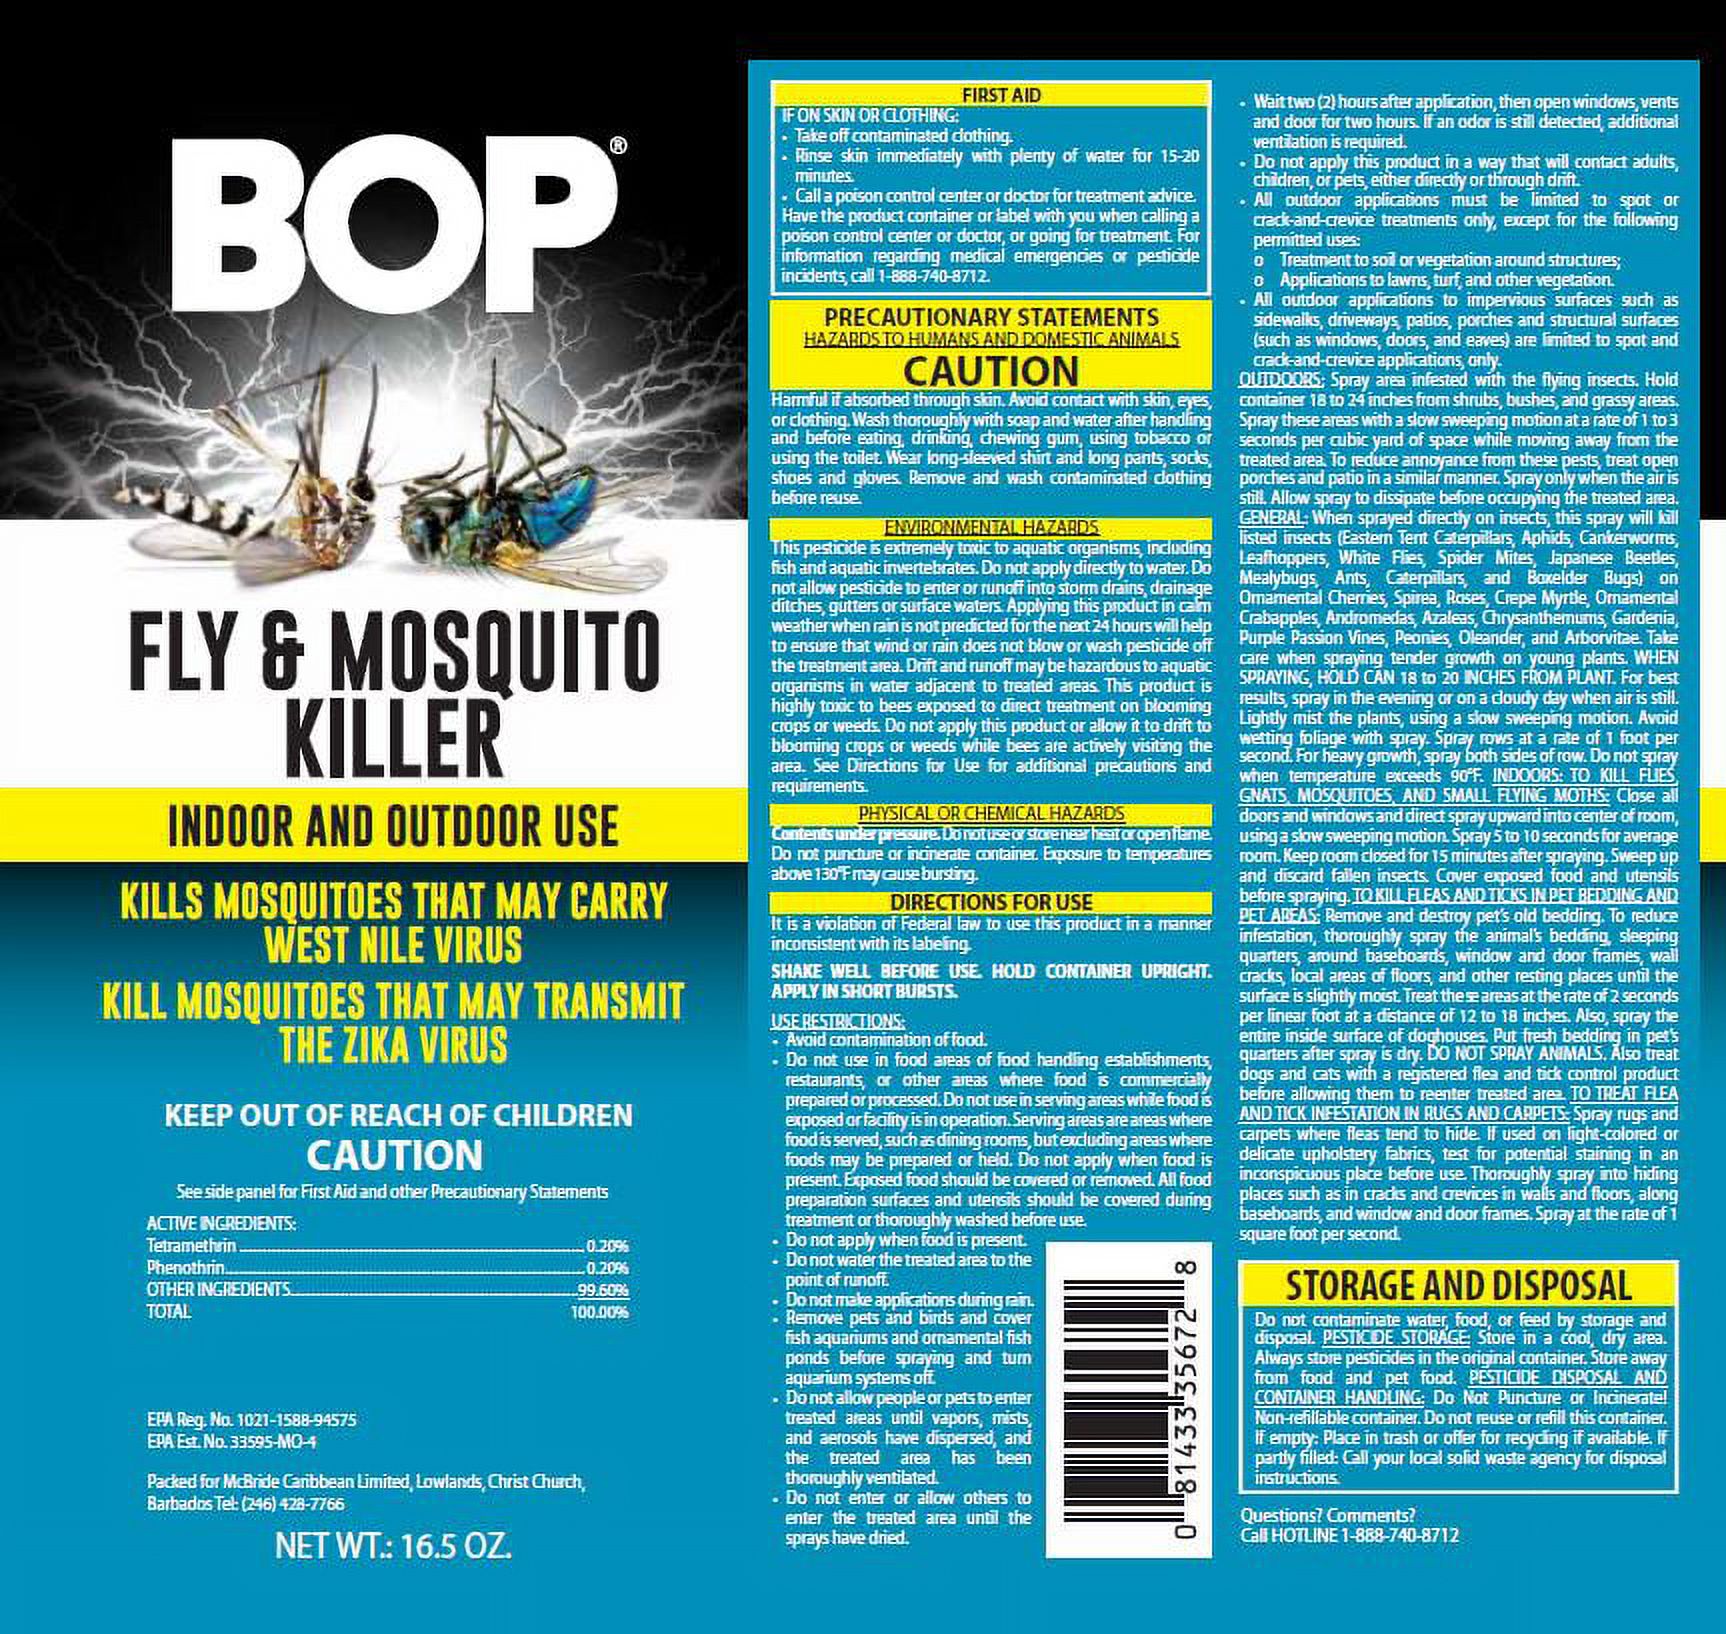 BOP Fly and Mosquito Killer, 16.5 oz, Easy To Use Pest Control Spray, Kills Bugs On Contact And Keeps Your Home Insect Free, Indoor/Outdoor Use For Quick Results - image 2 of 8